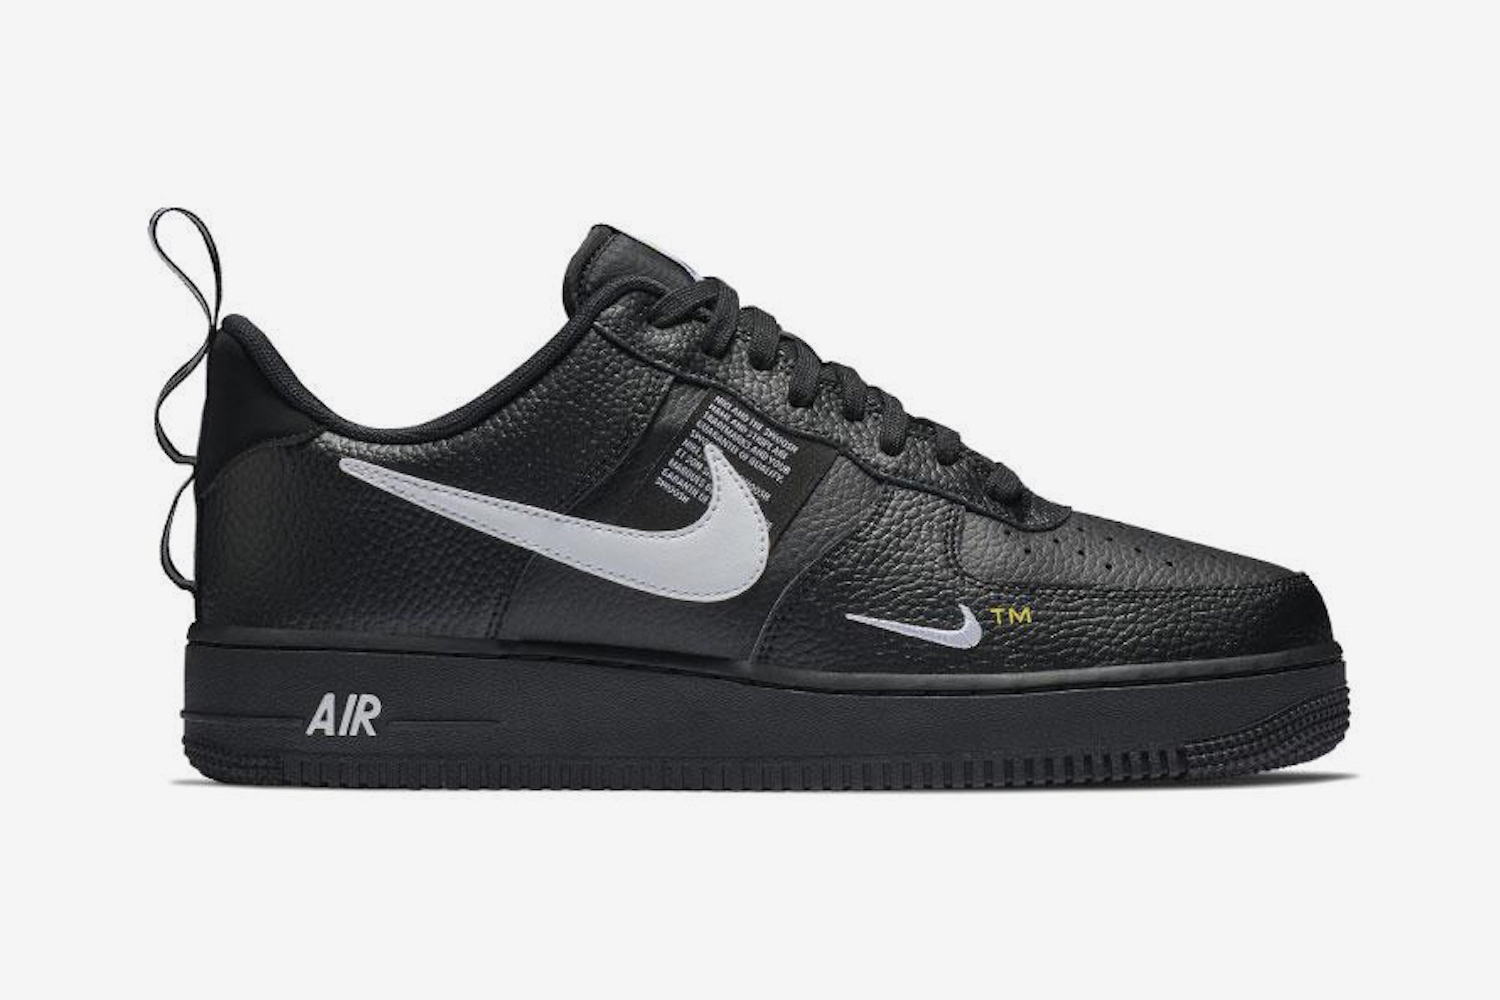 Air 1 Low LV8 "Black" & "White": Release Date, Price & More